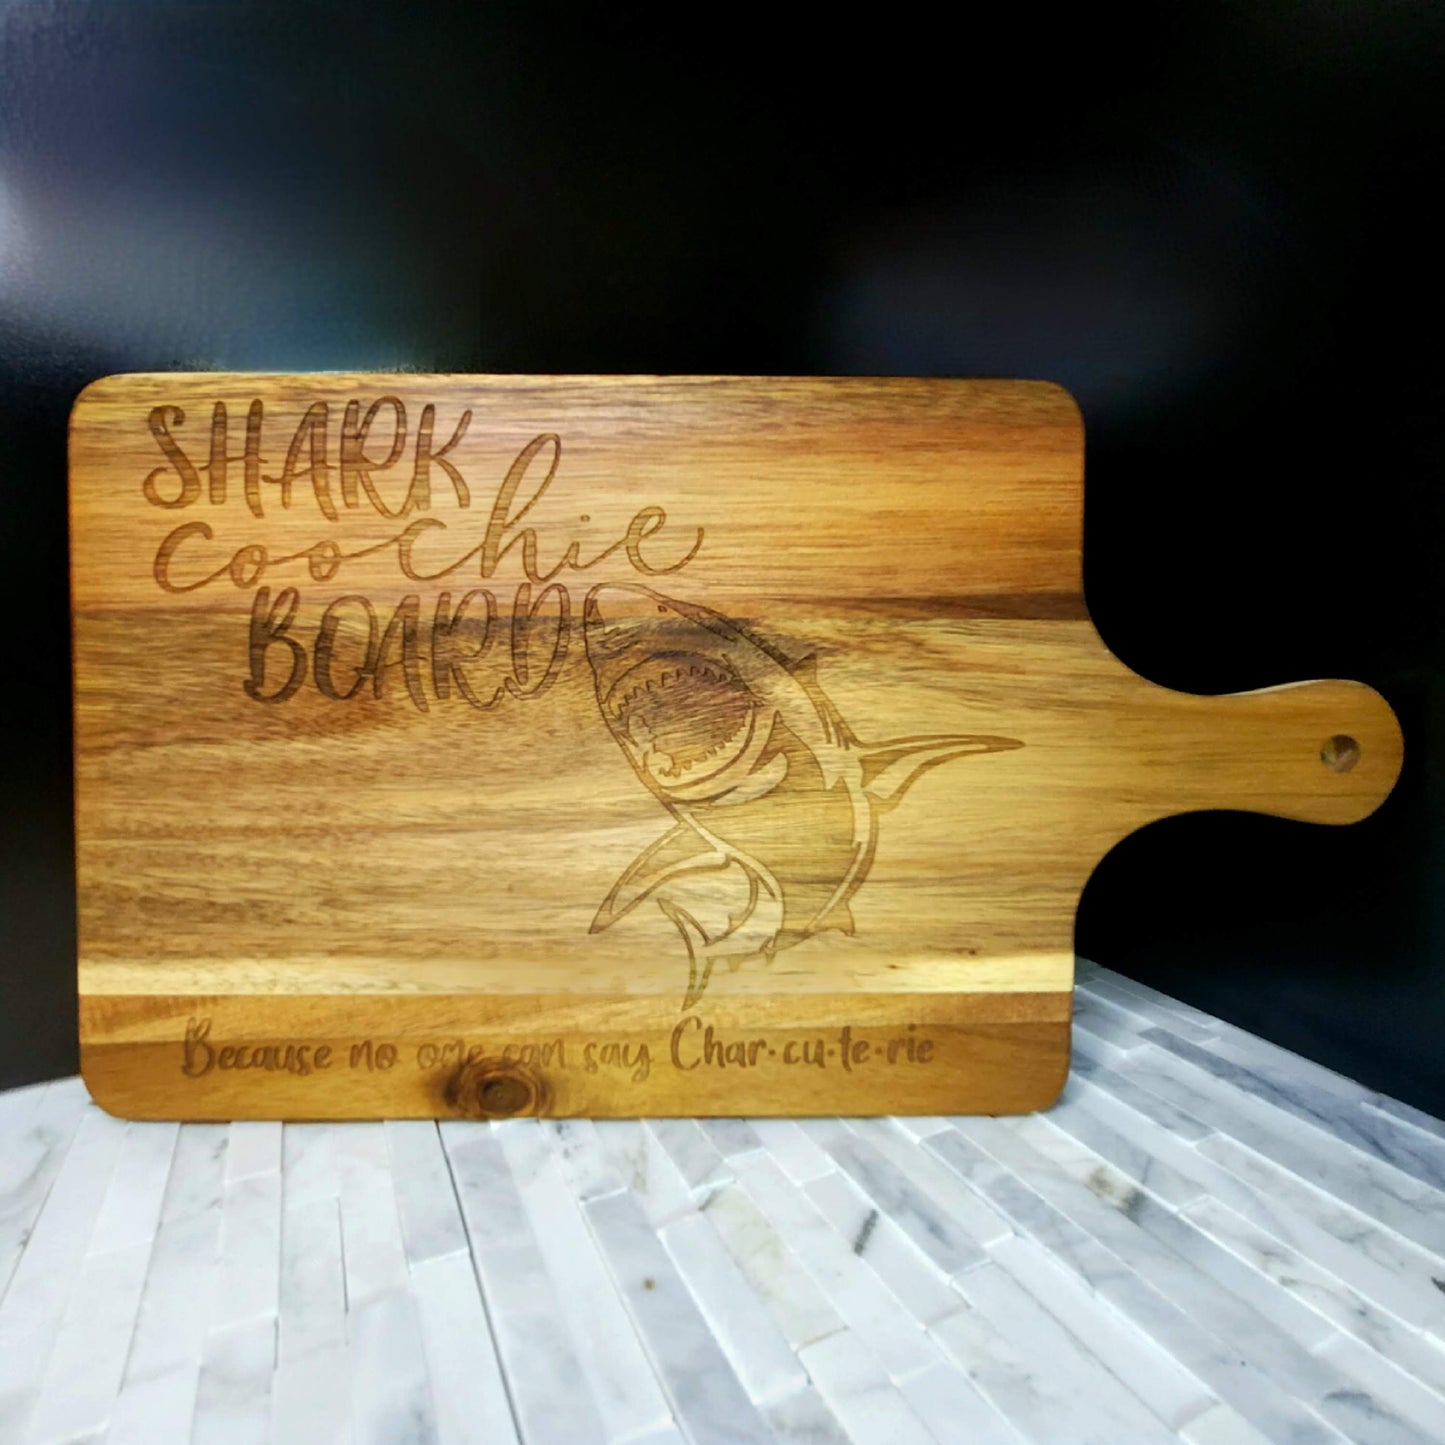 Acacia Charcuterie Board - Shark Coochie Board because no one can say charcuterie